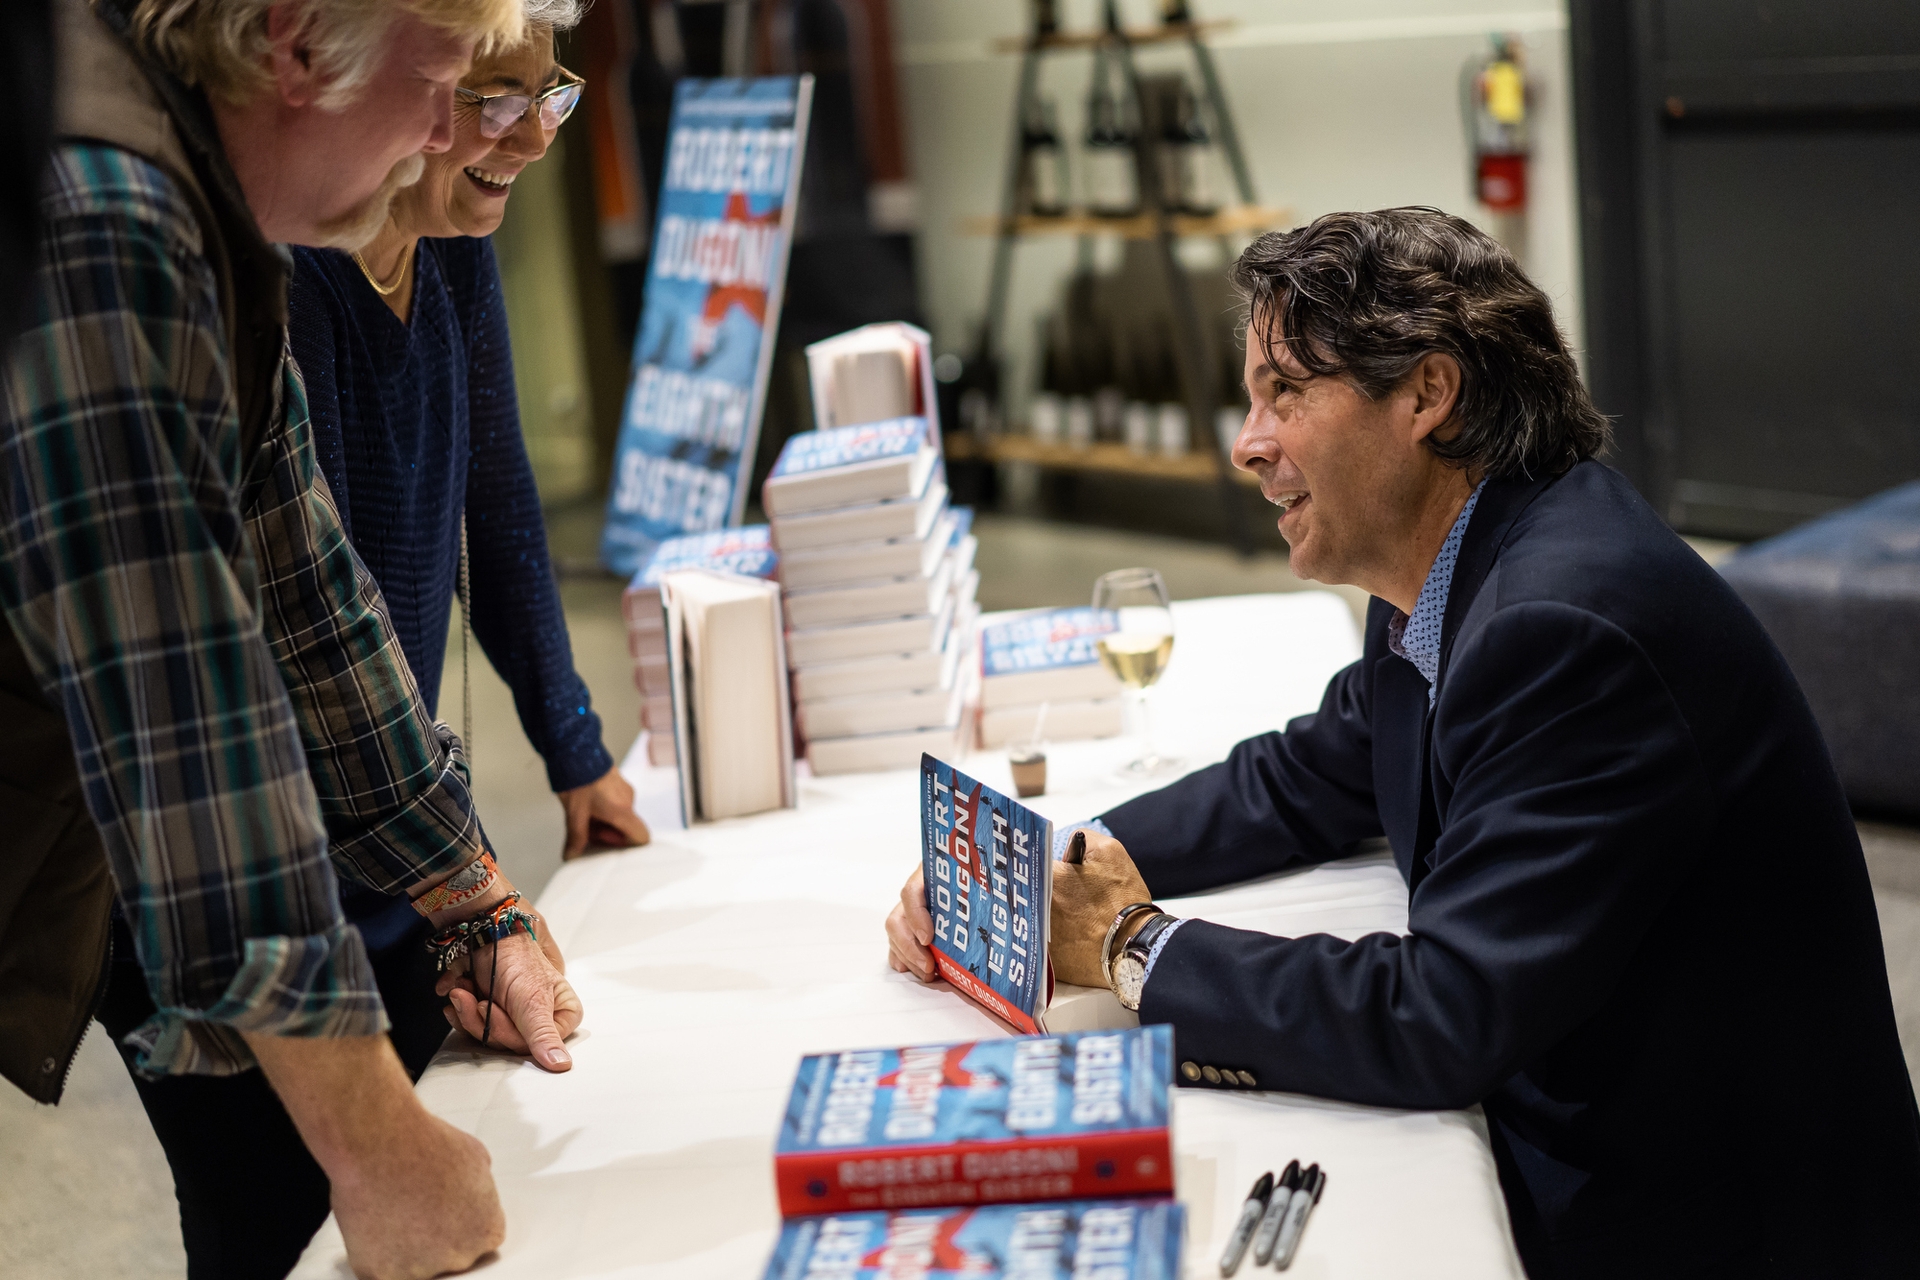 Author Robert Dugoni signs a copy of his book for a fan, looking up at the fan and engaging in conversation.